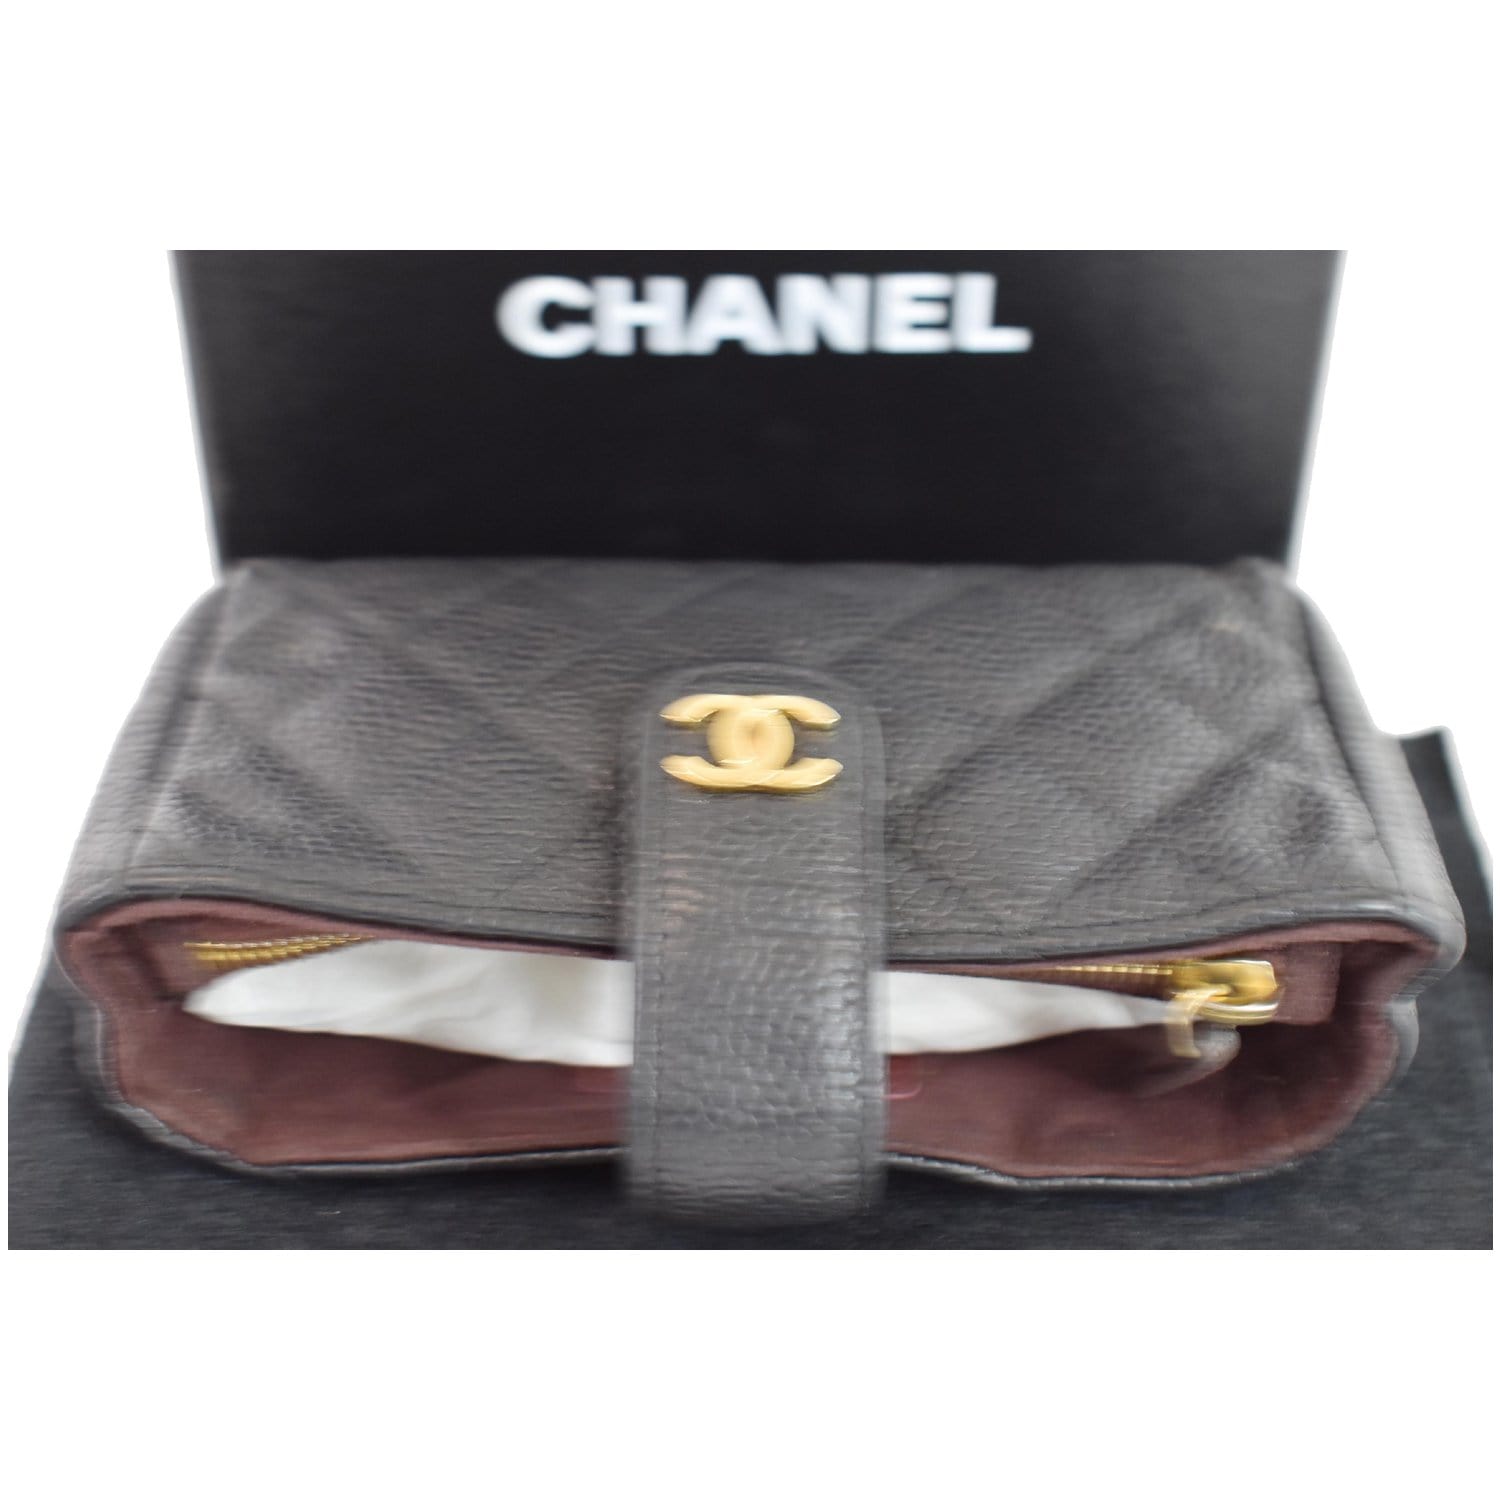 Chanel Caviar Quilted Phone Holder With Chain Black in Leather